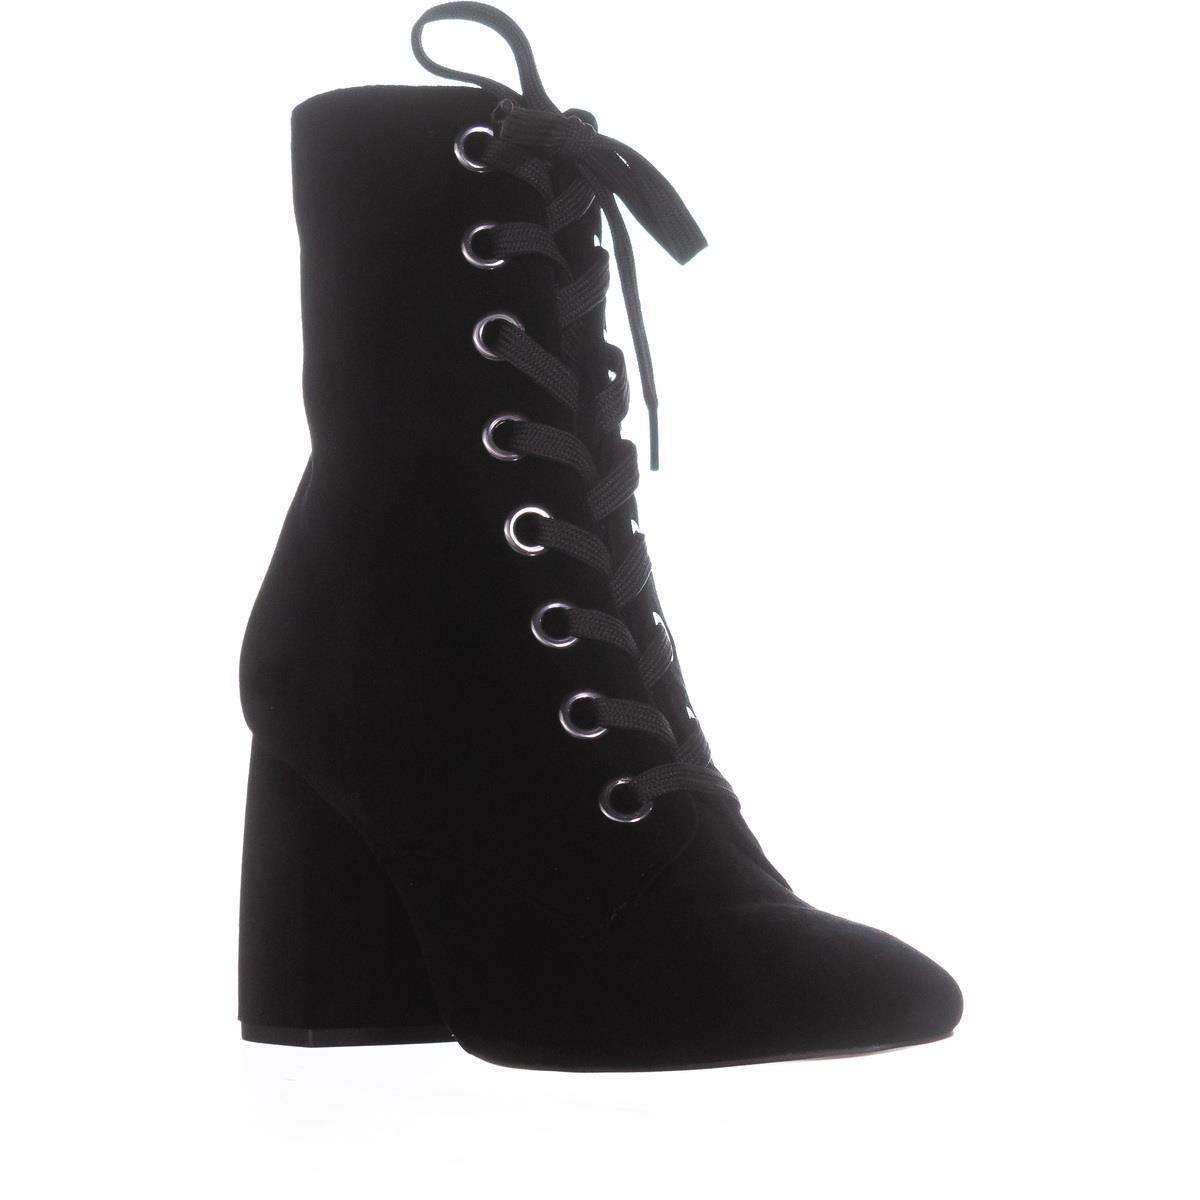 BCBGeneration Alexa Lace Up Block Heel Boots in Black - Lyst